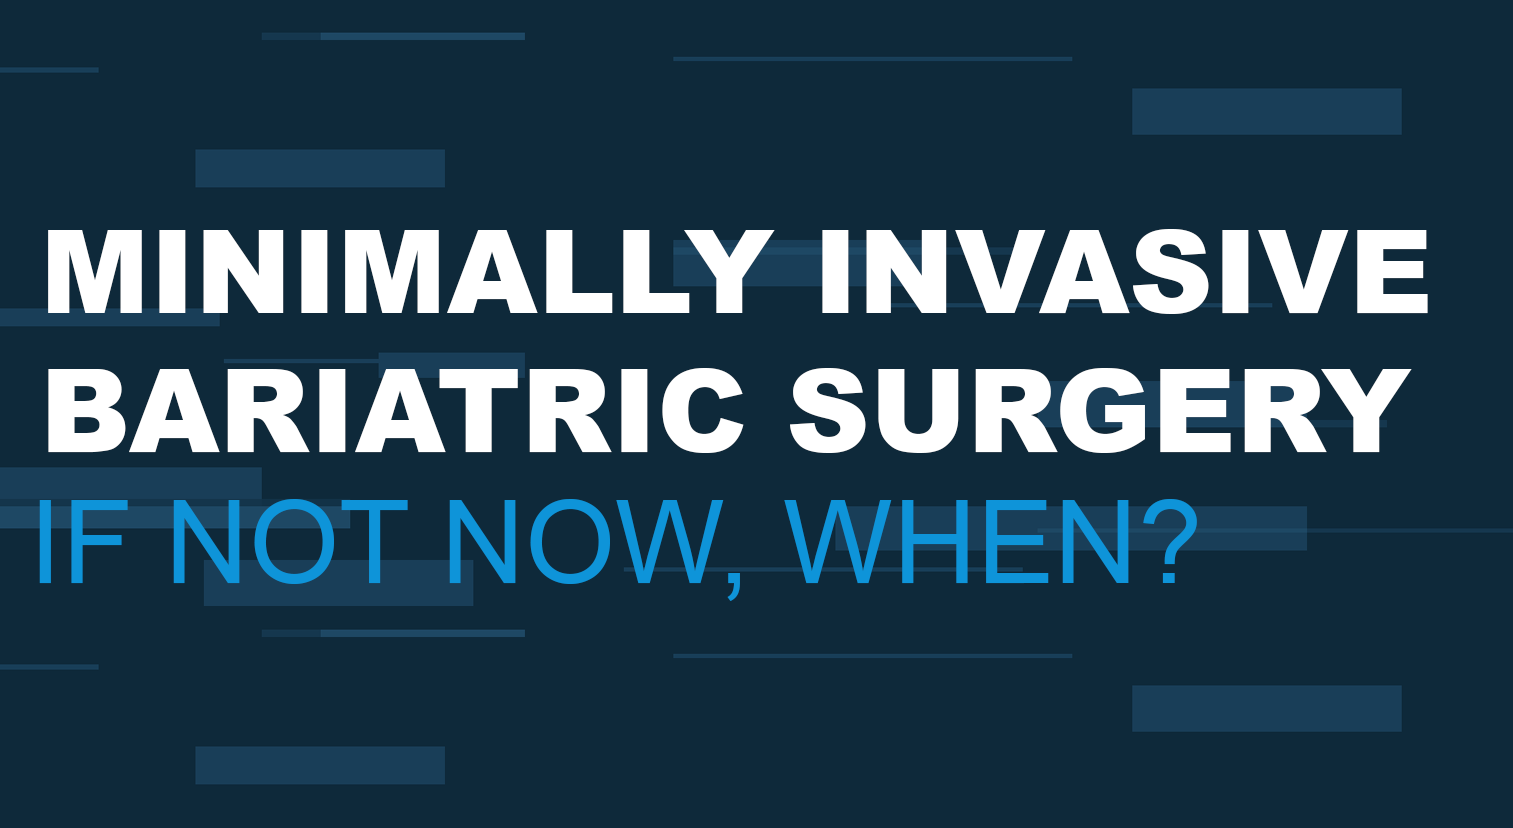 Minimally Invasive Bariatric Surgery If Not Now, When?